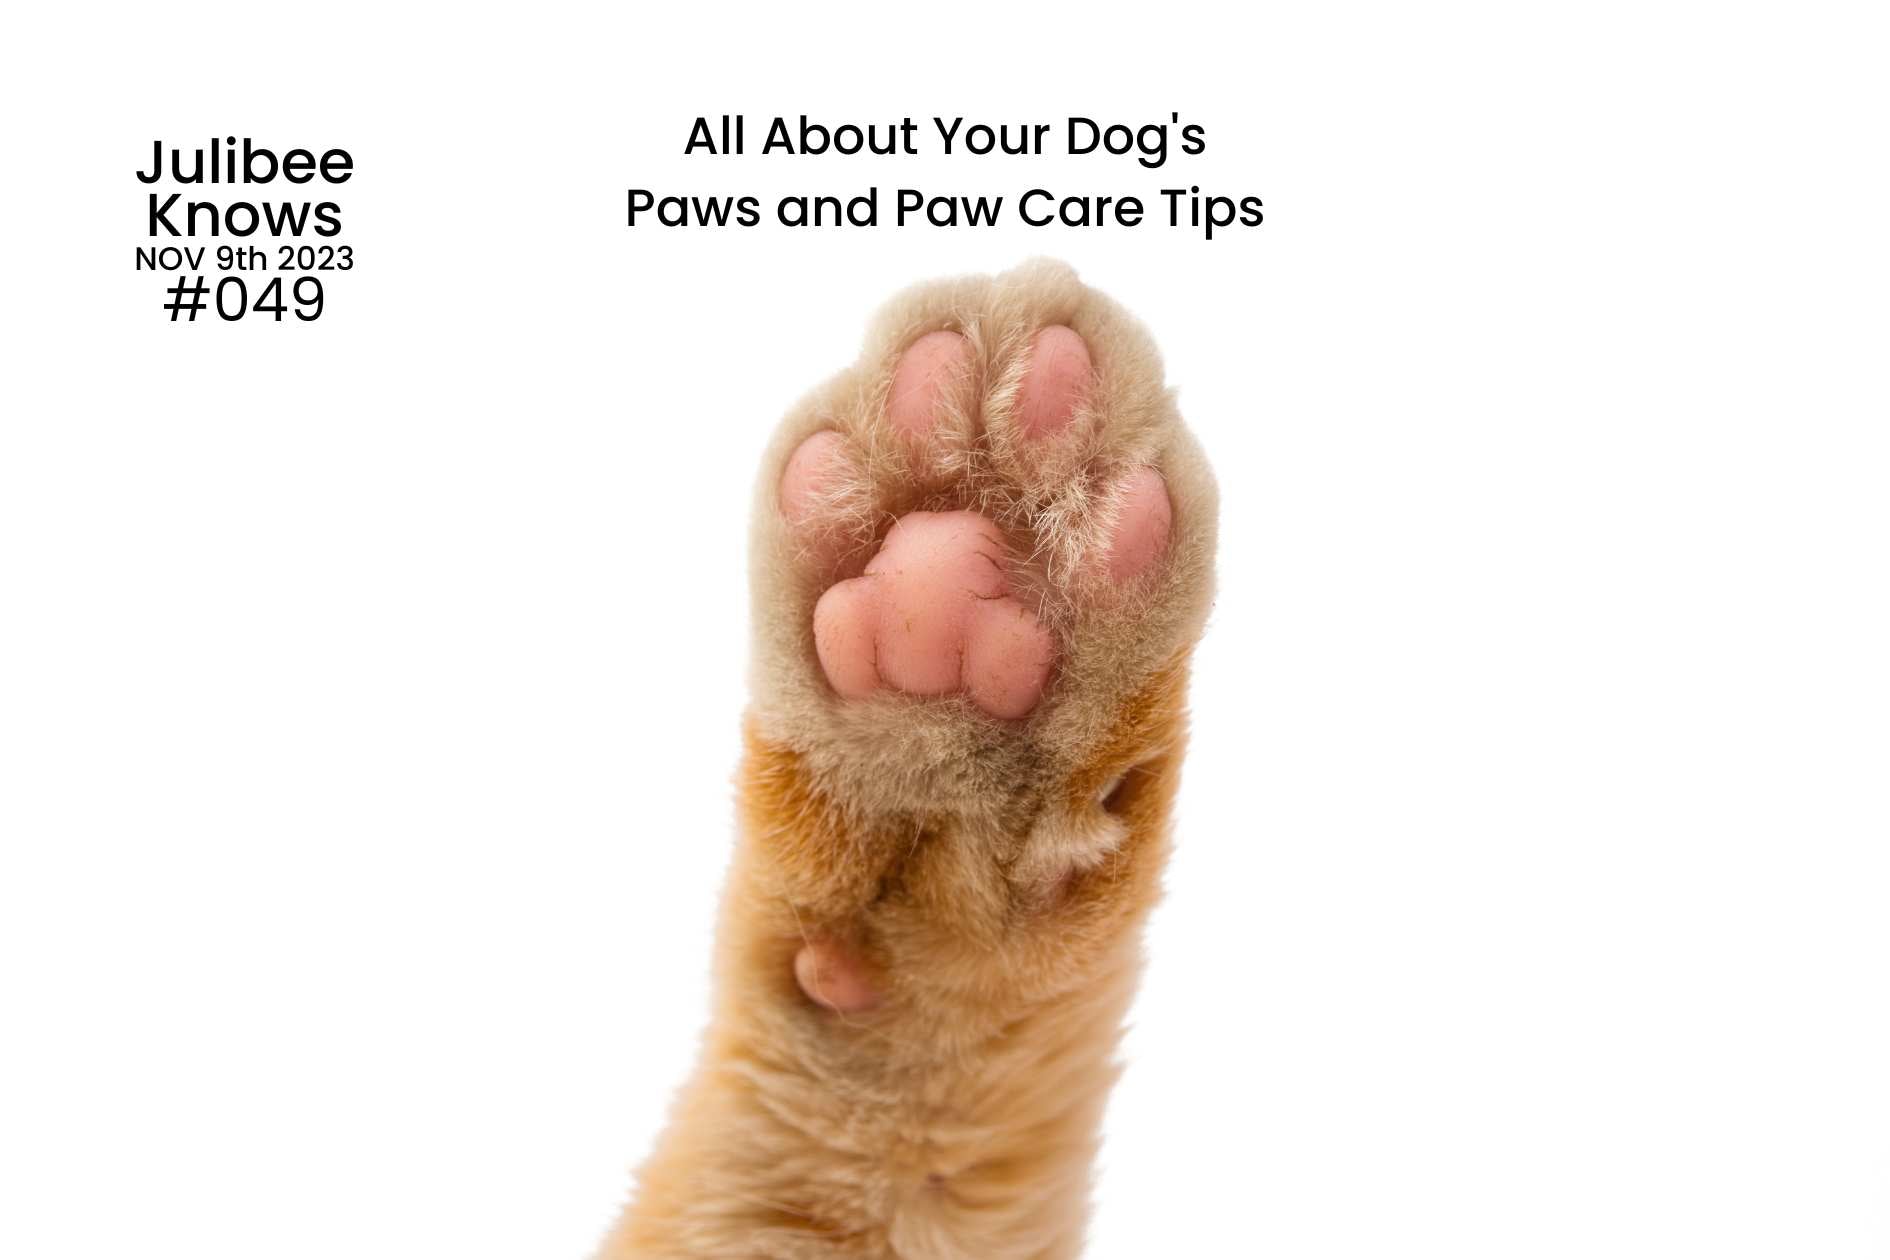 All About Your Dog's Paws and Paw Care Tips